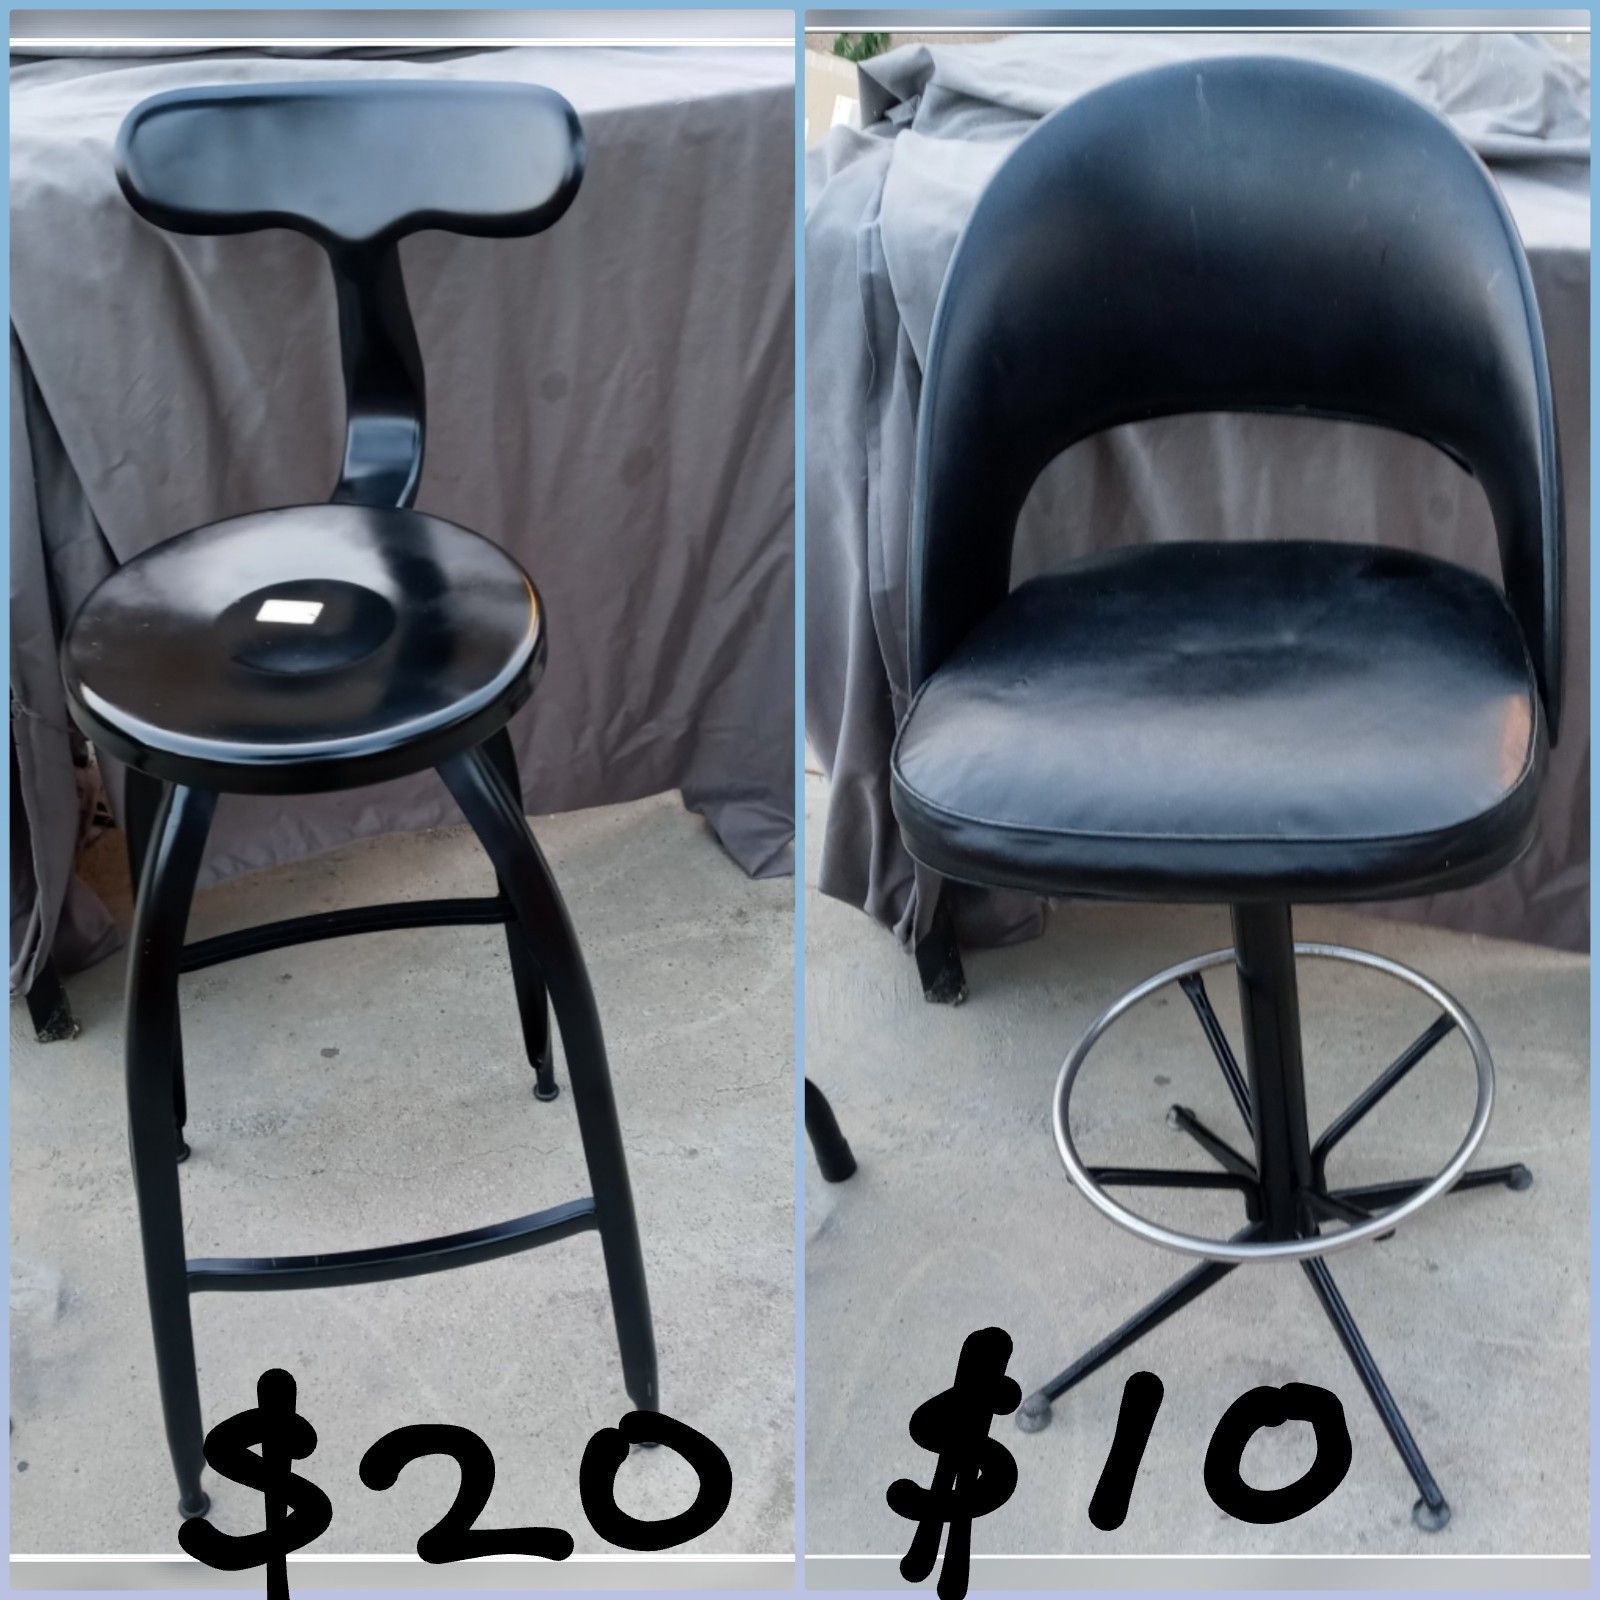 TWO BLACK TALL BAR CHAIRS THE FIRST ONE IS ALL METAL $20 AND THE SECOND ONE SWIVELS $10